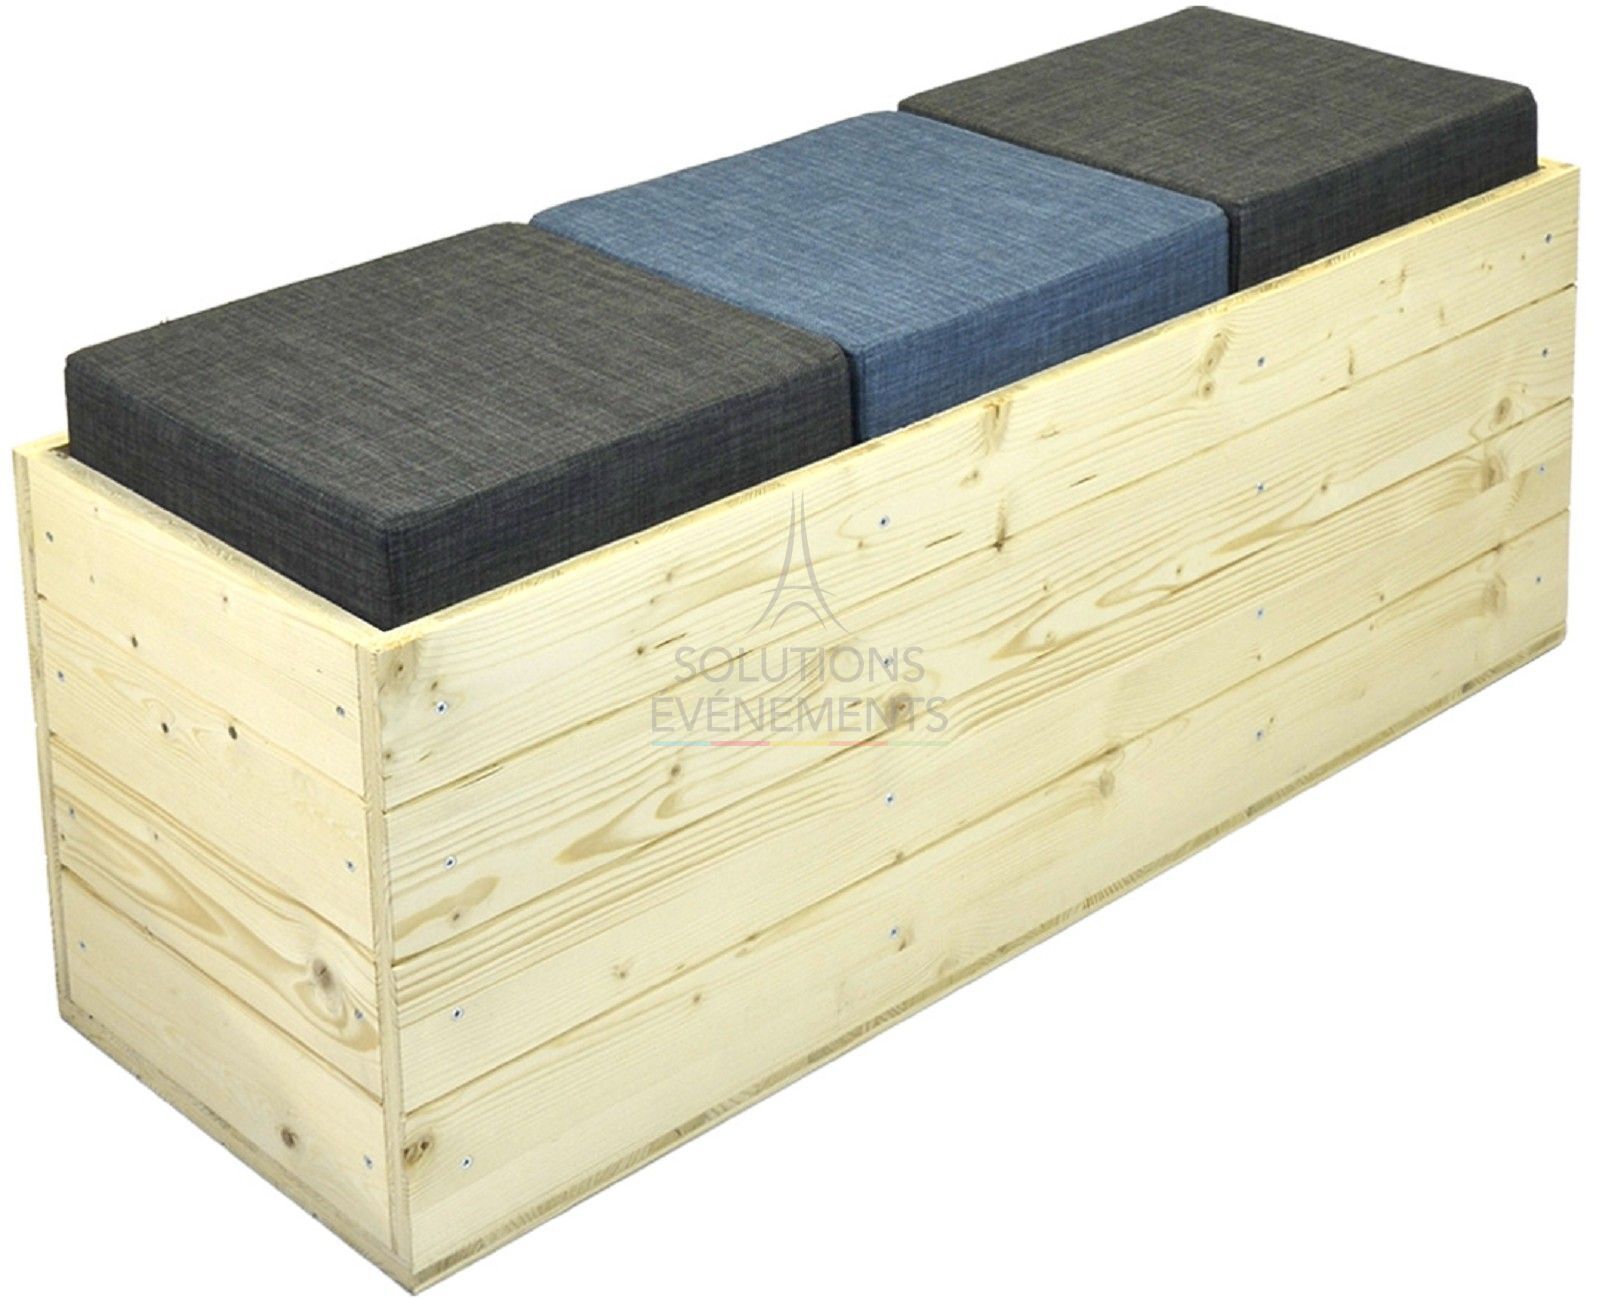 Rental of eco-responsible wooden bench in gray and blue fabric